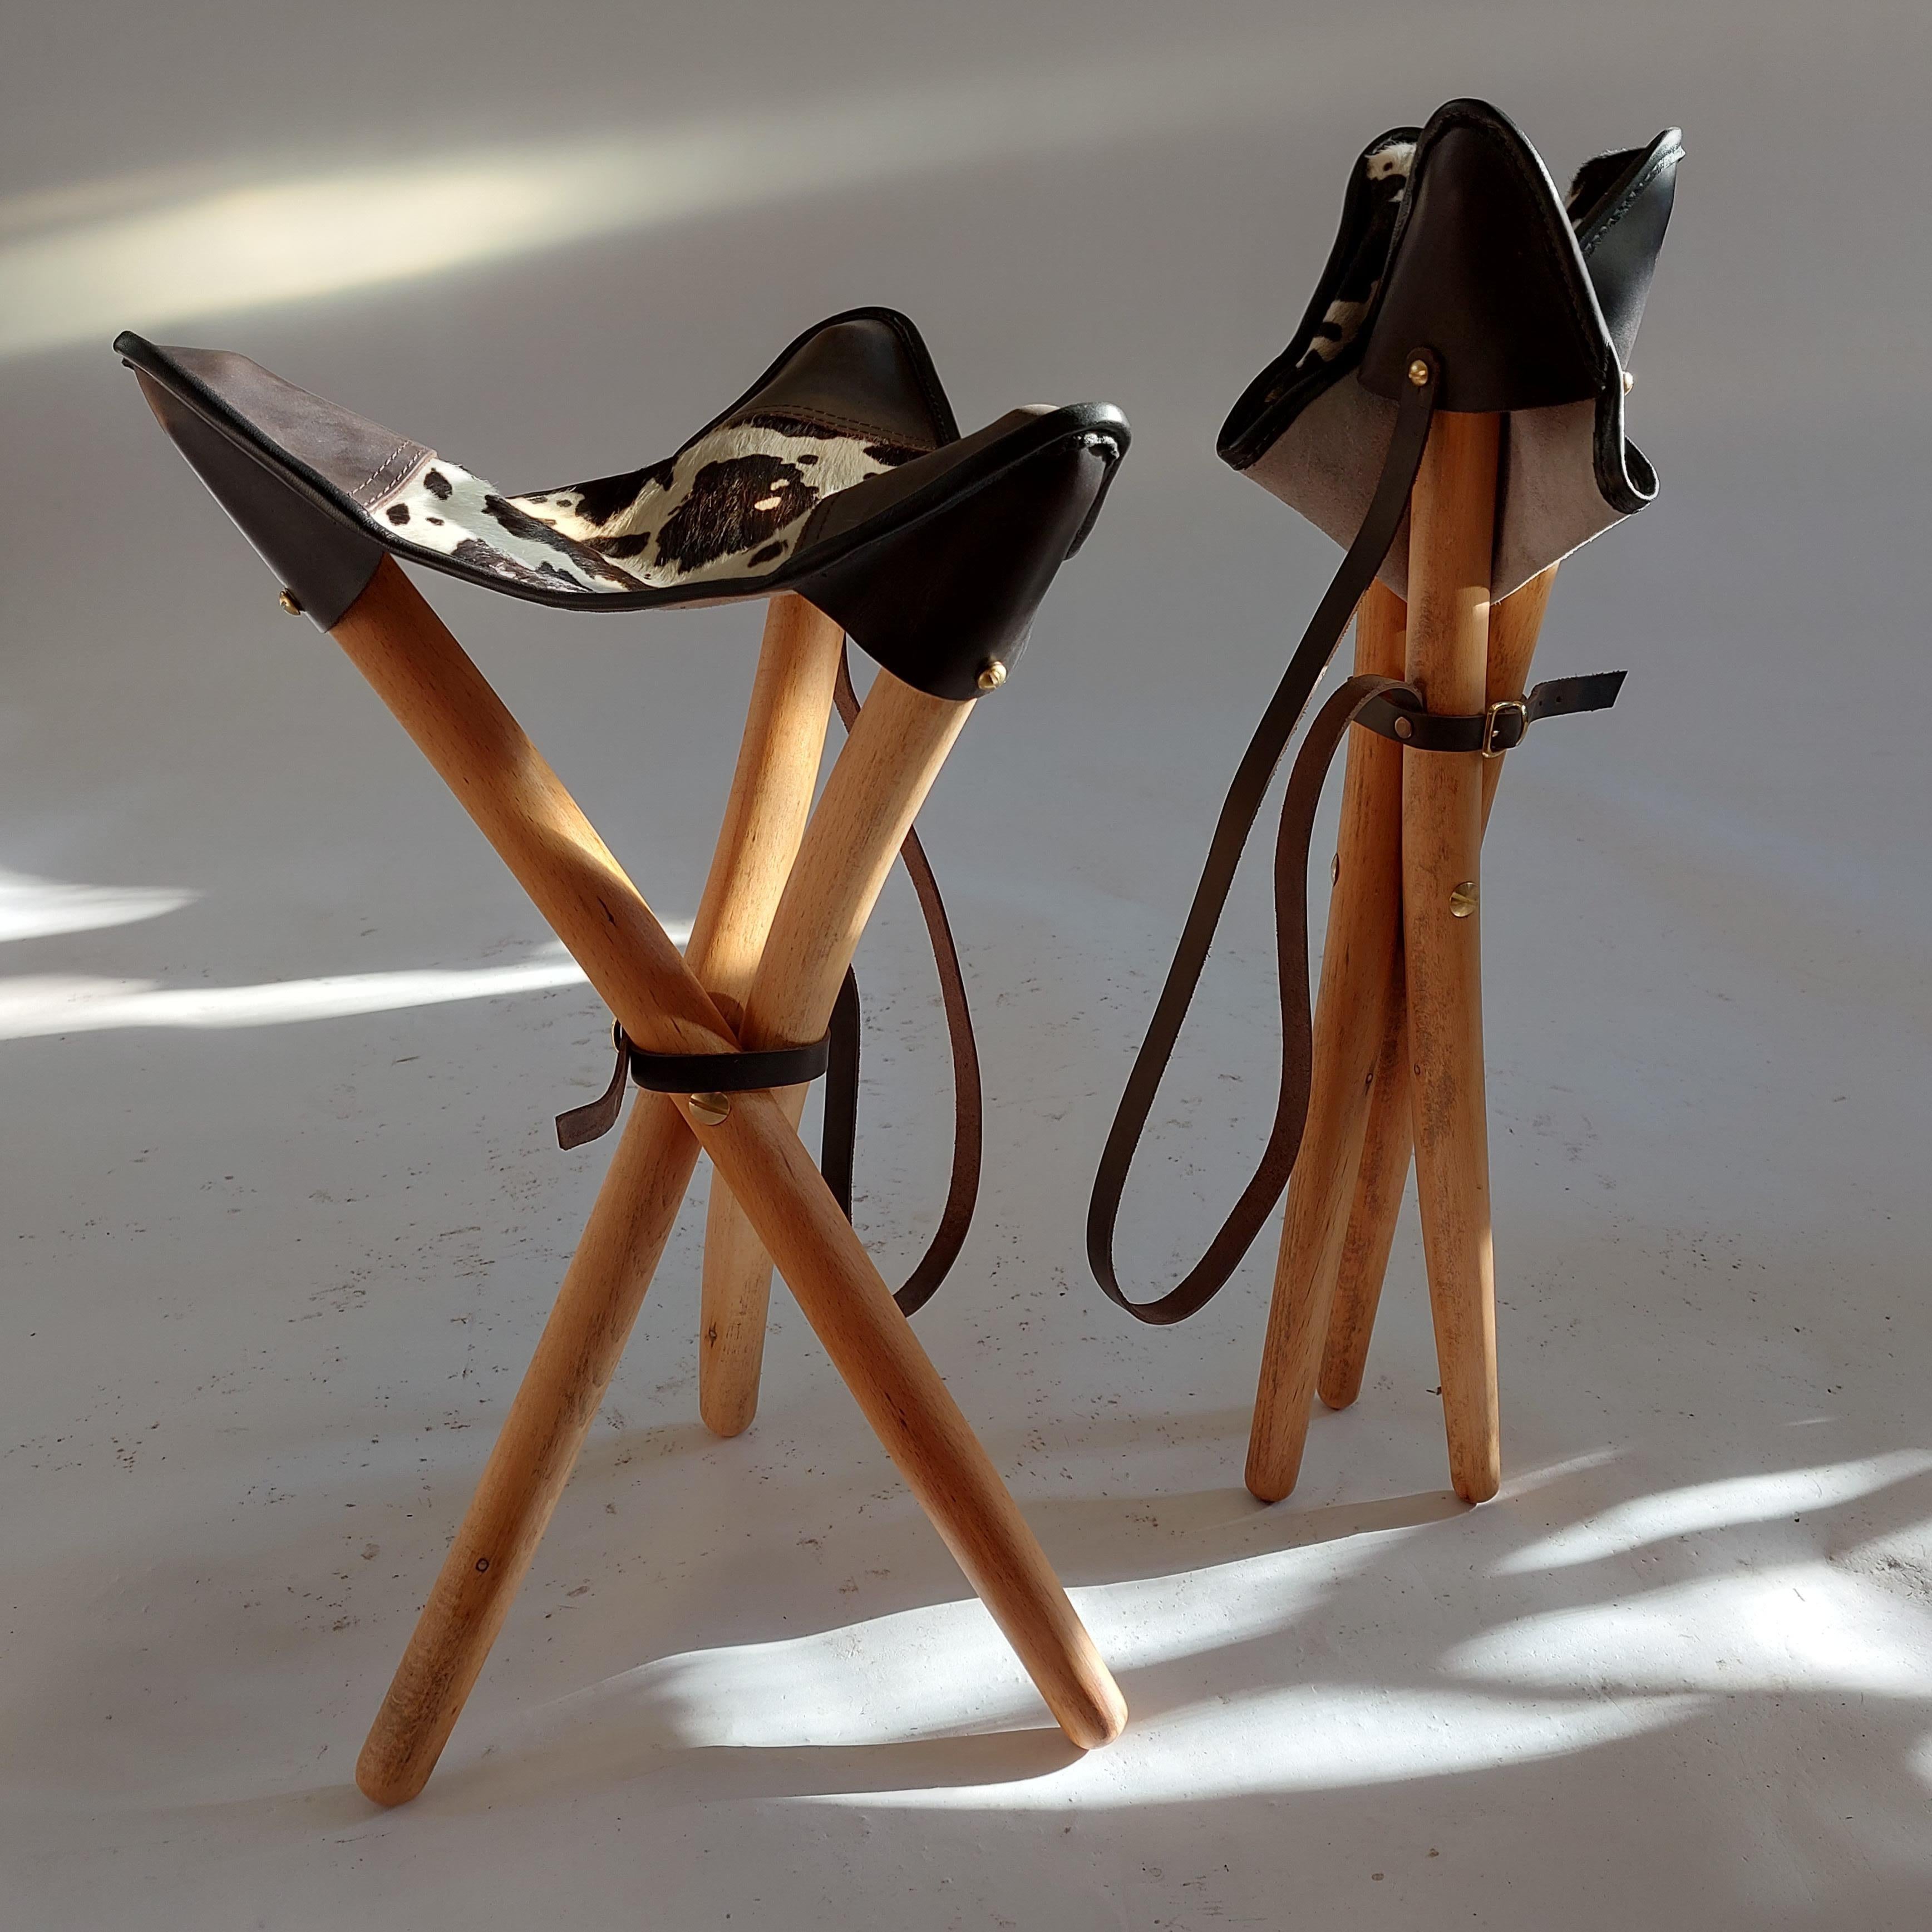 Hand Made Walnut Tripod Folding Stool Dalmatian Leather Seat by PUNKT Workshop In New Condition For Sale In Sofia, BG